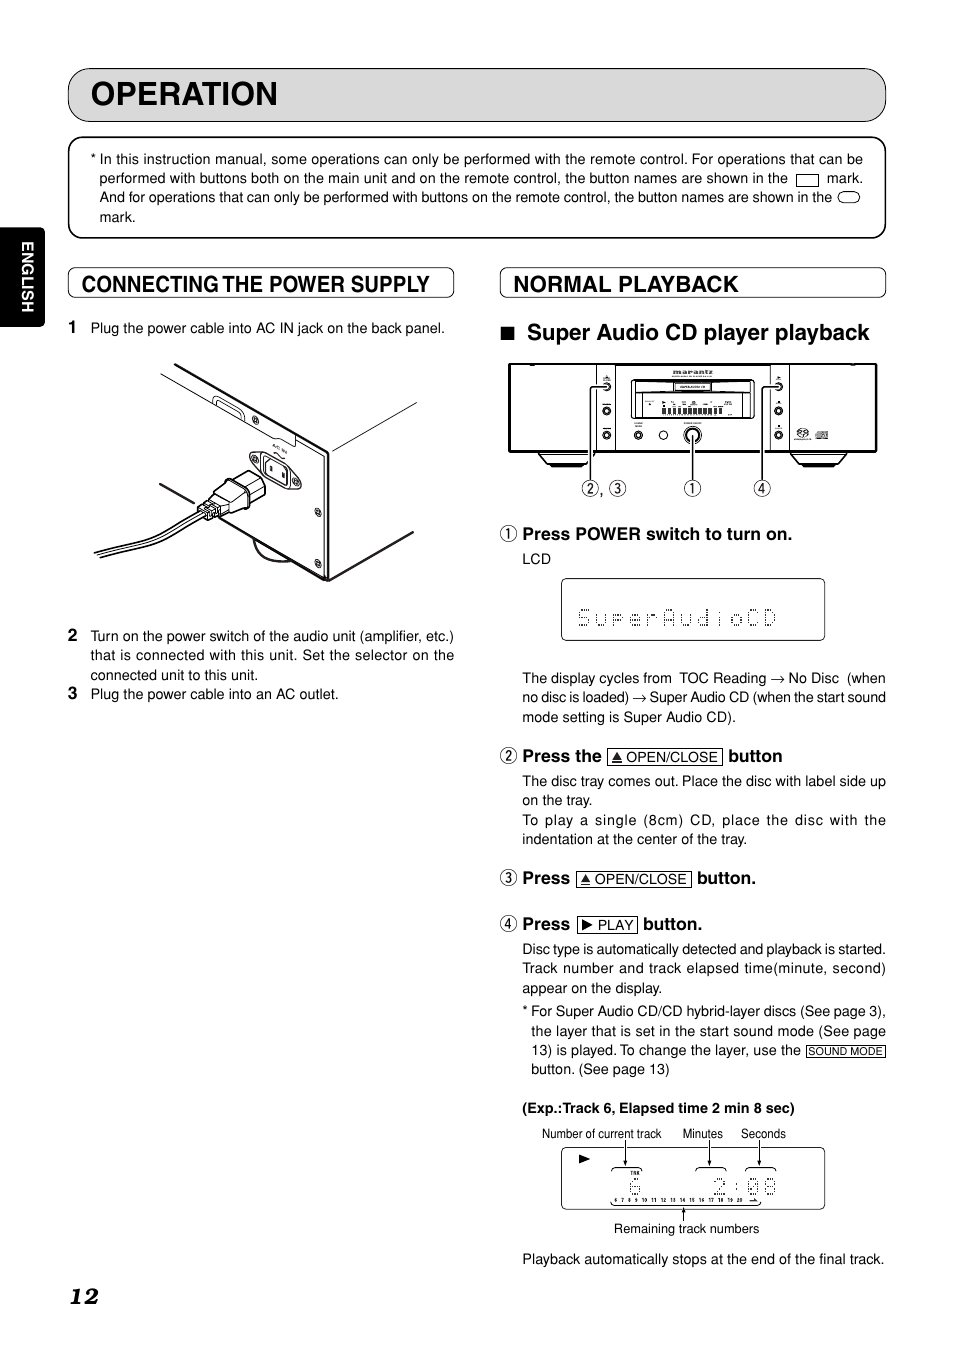 Operation, Connecting the power supply, Normal playback 7 super audio cd player playback | Marantz SA-11S1 User Manual | Page 17 / 29